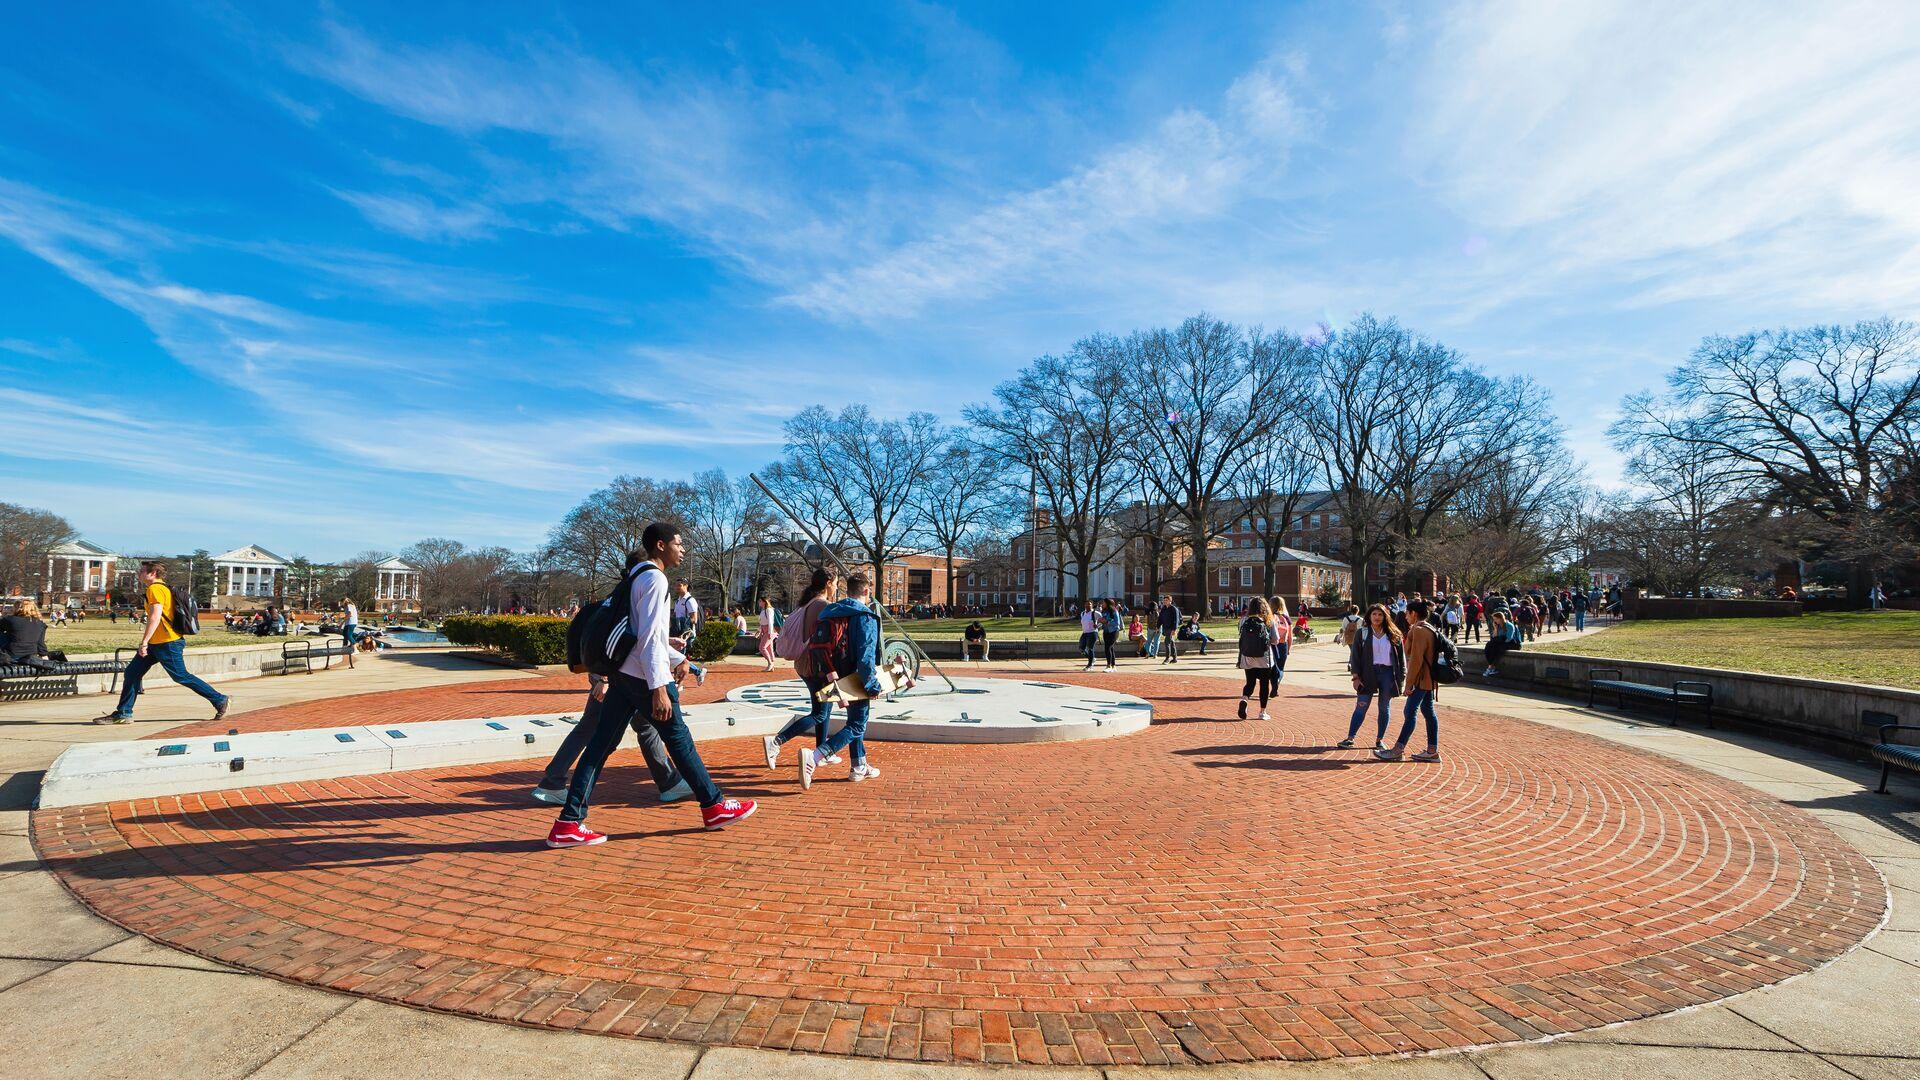 A view of the Sundial on the Mall with student activity on an unseasonably warm winter day.